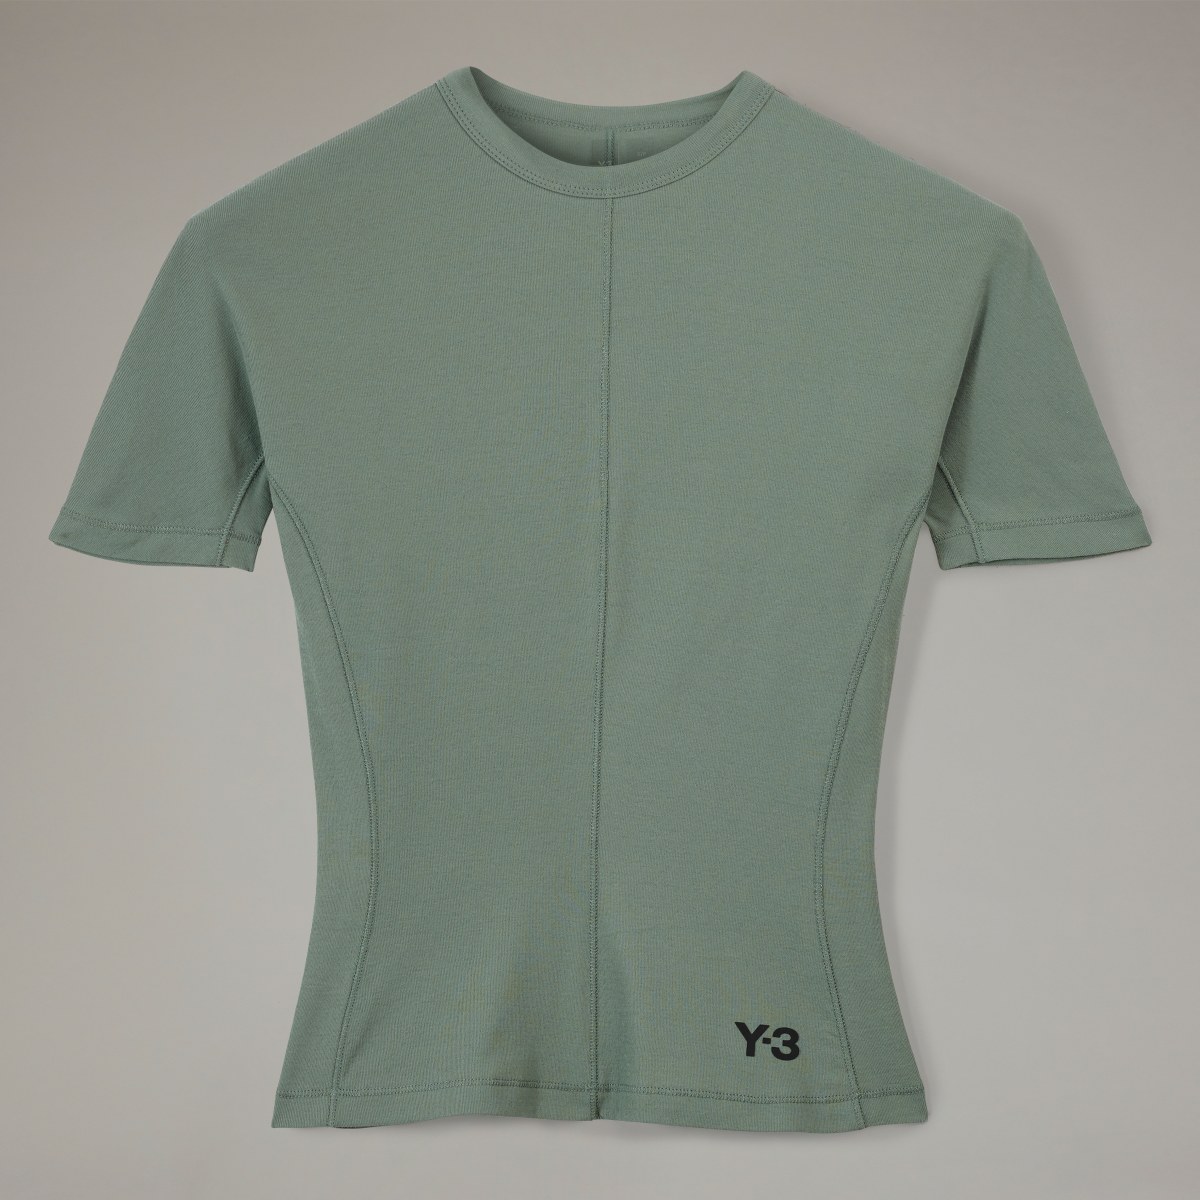 Adidas Y-3 Fitted Short Sleeve Tee. 5